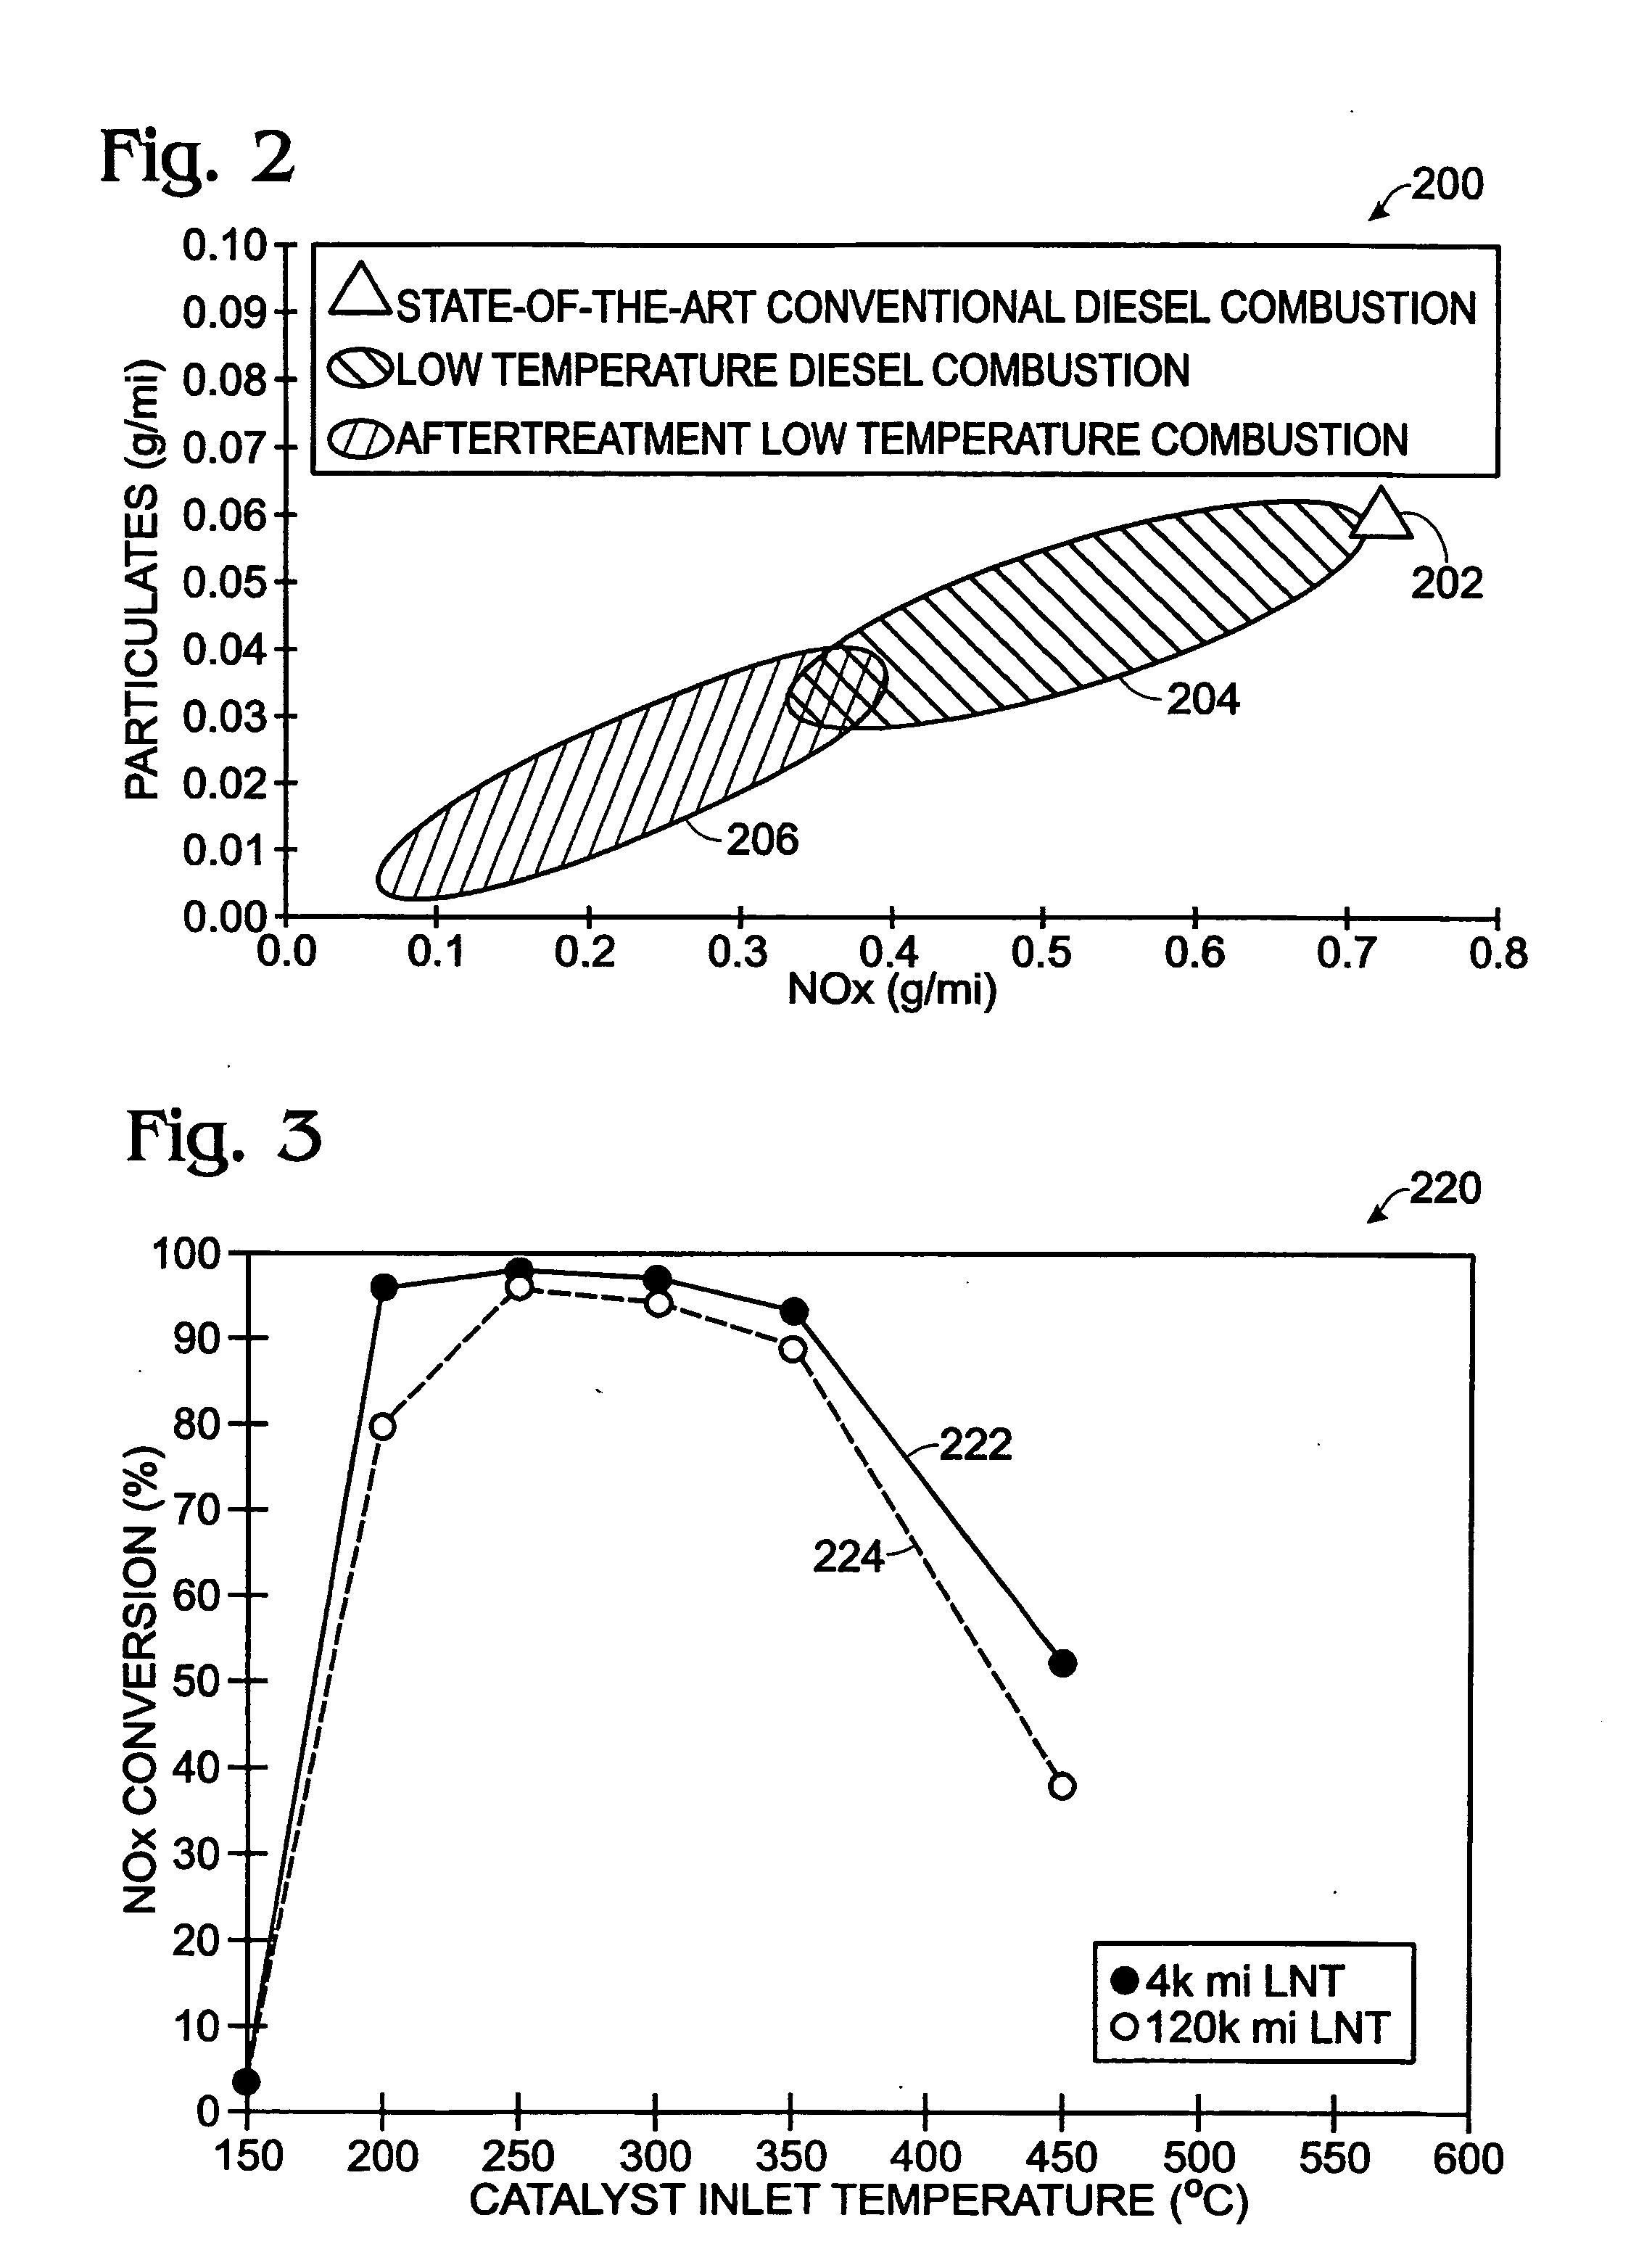 System and method for reducing NOx emissions in an apparatus having a diesel engine